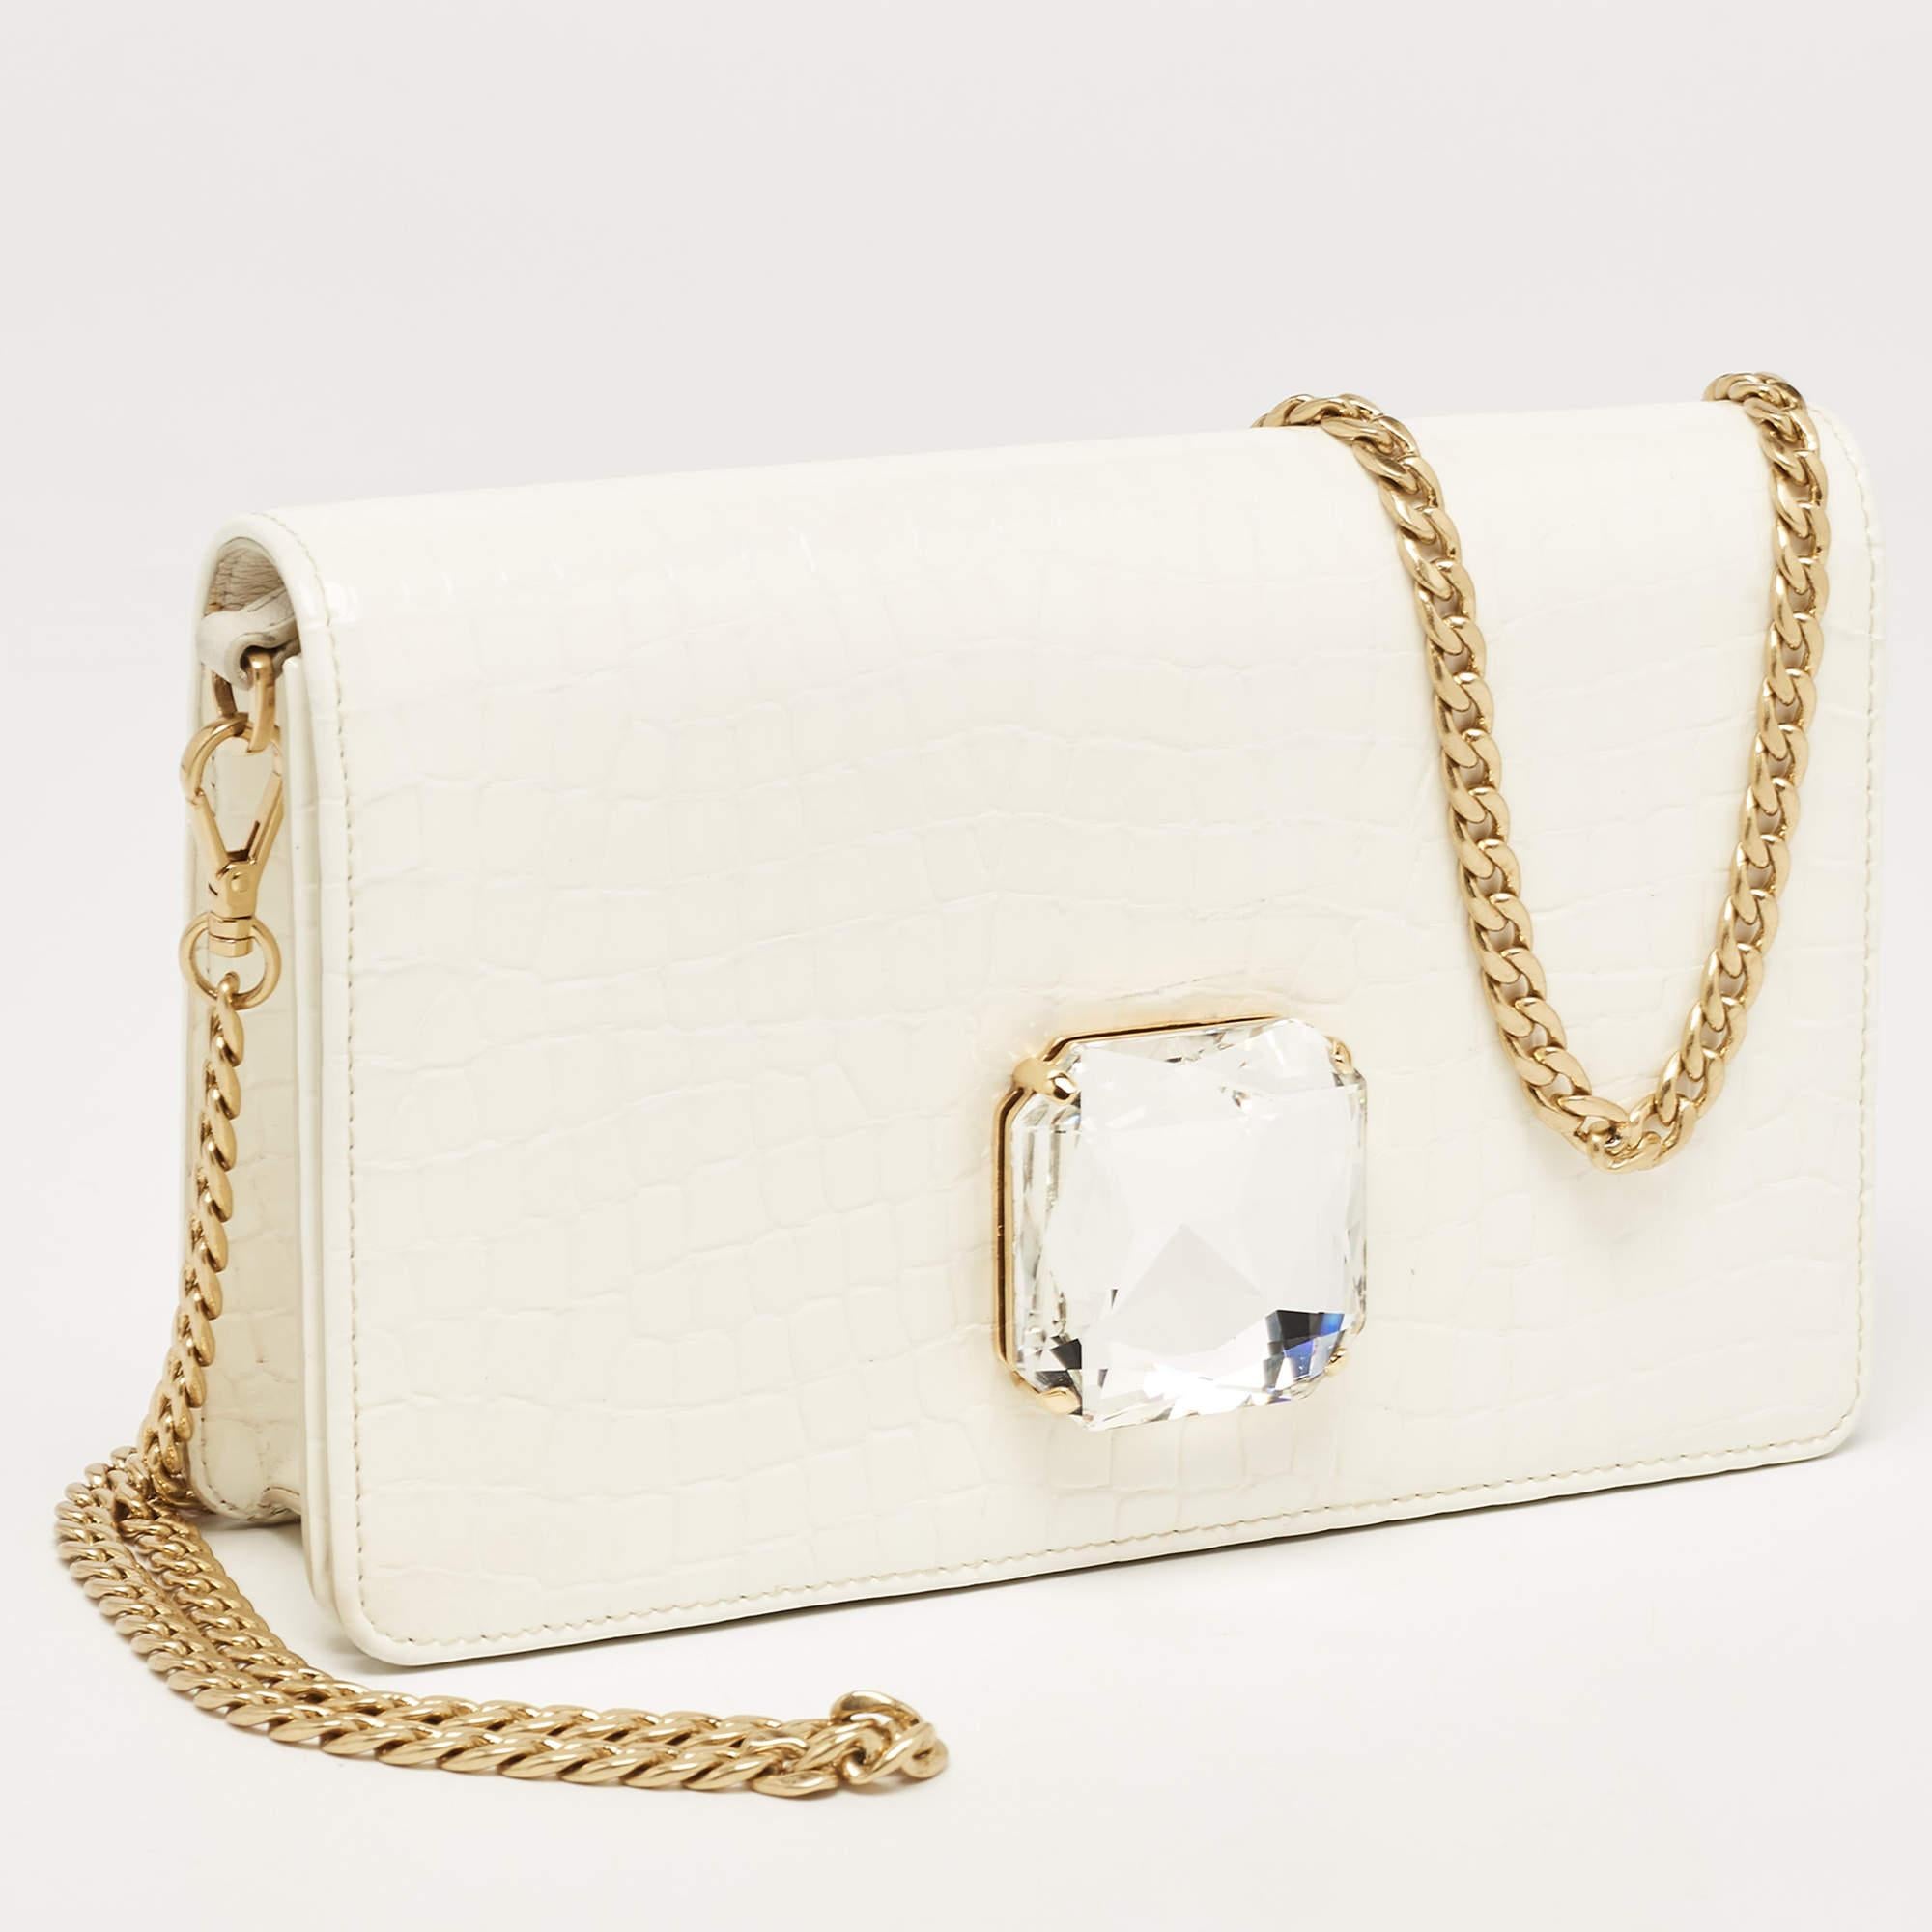 Miu Miu Off White Croc Embossed Leather Crystal Embellished Chain Clutch For Sale 6